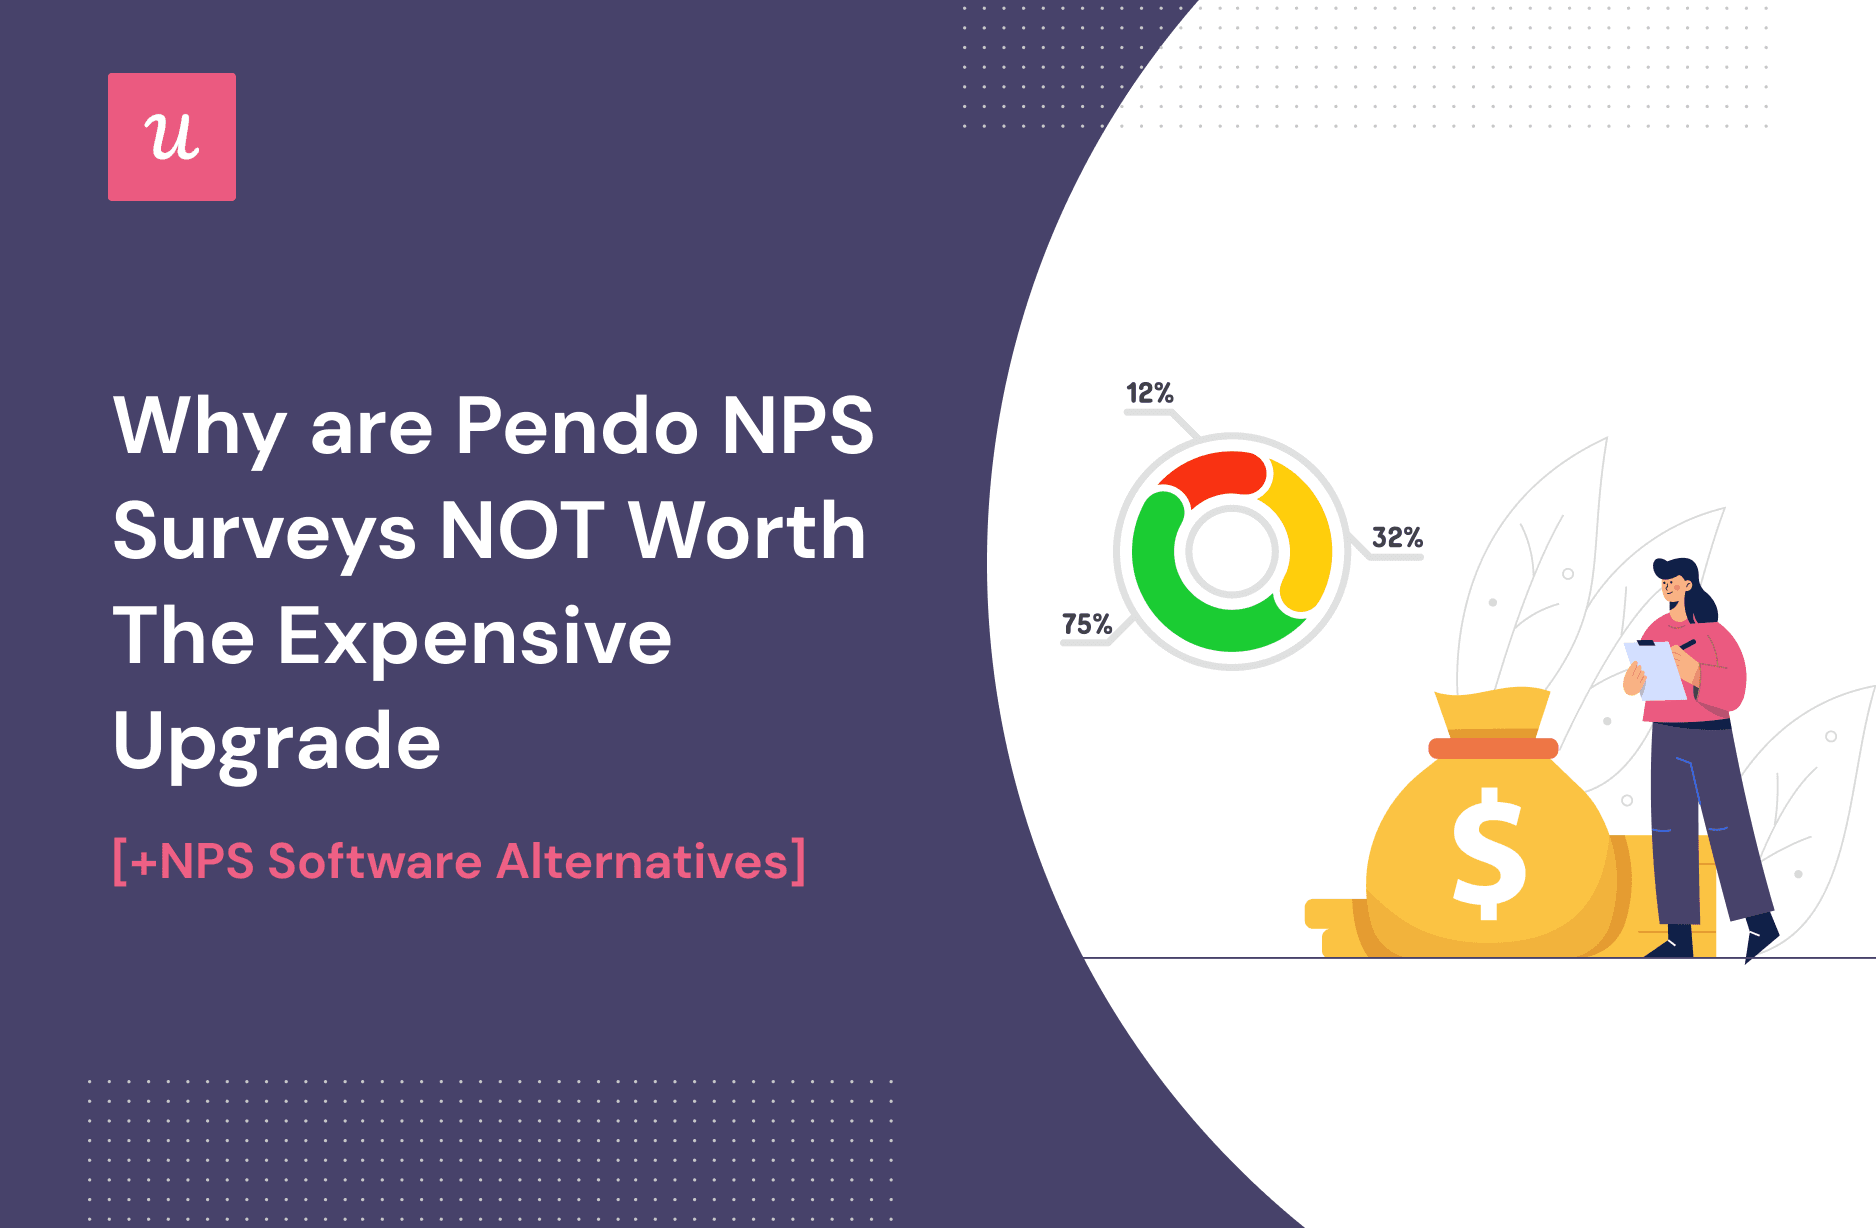 Why are Pendo NPS Surveys NOT Worth the Expensive Upgrade [+NPS Software Alternatives]